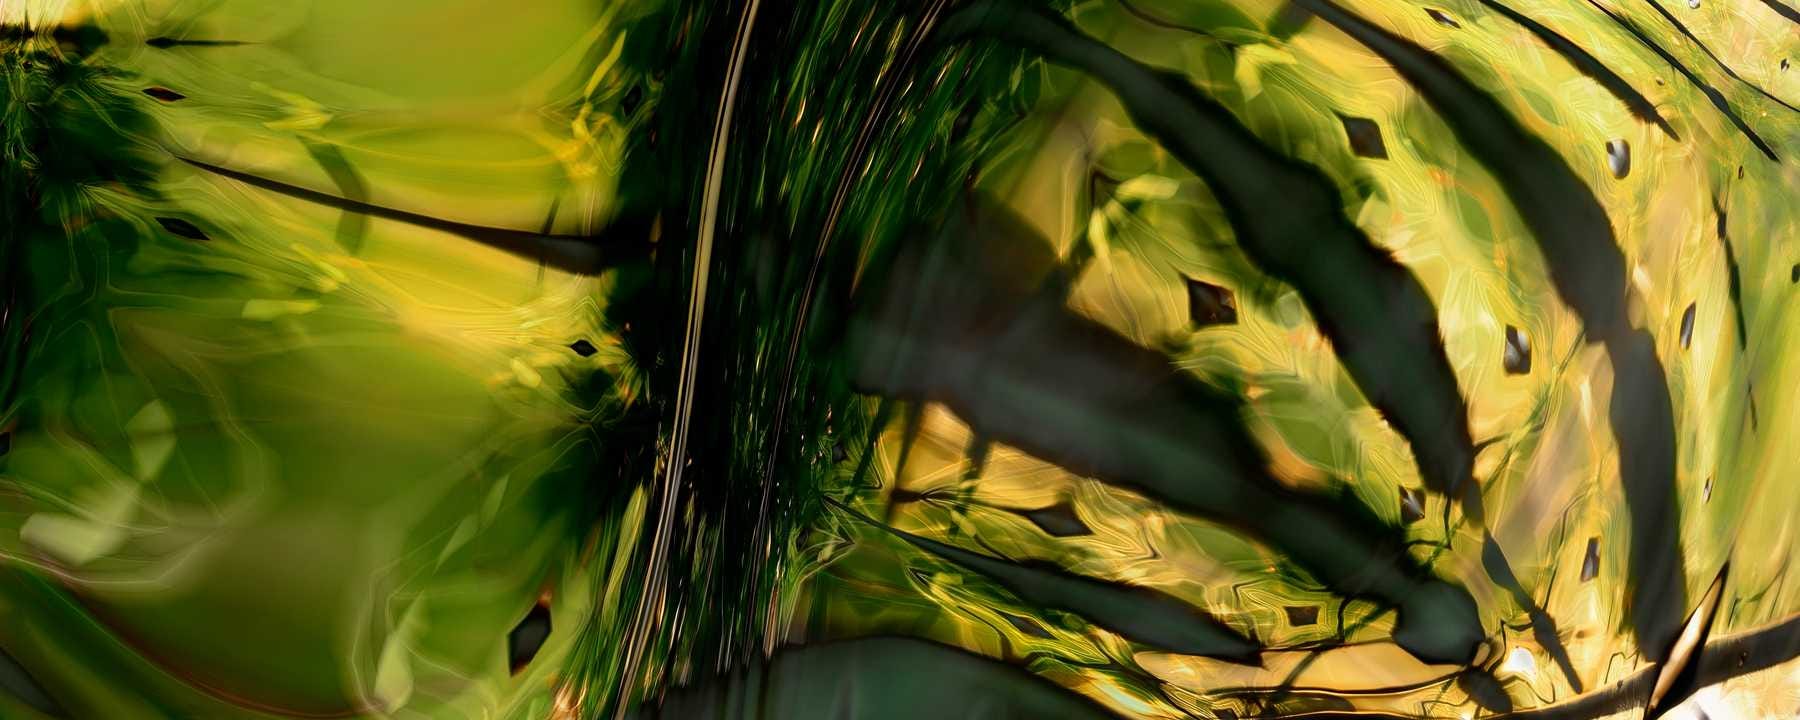 Still image from Cosmic Insignificance Therapy by Tim Murray-Browne showing an abstract green image reminiscent of a leaf.